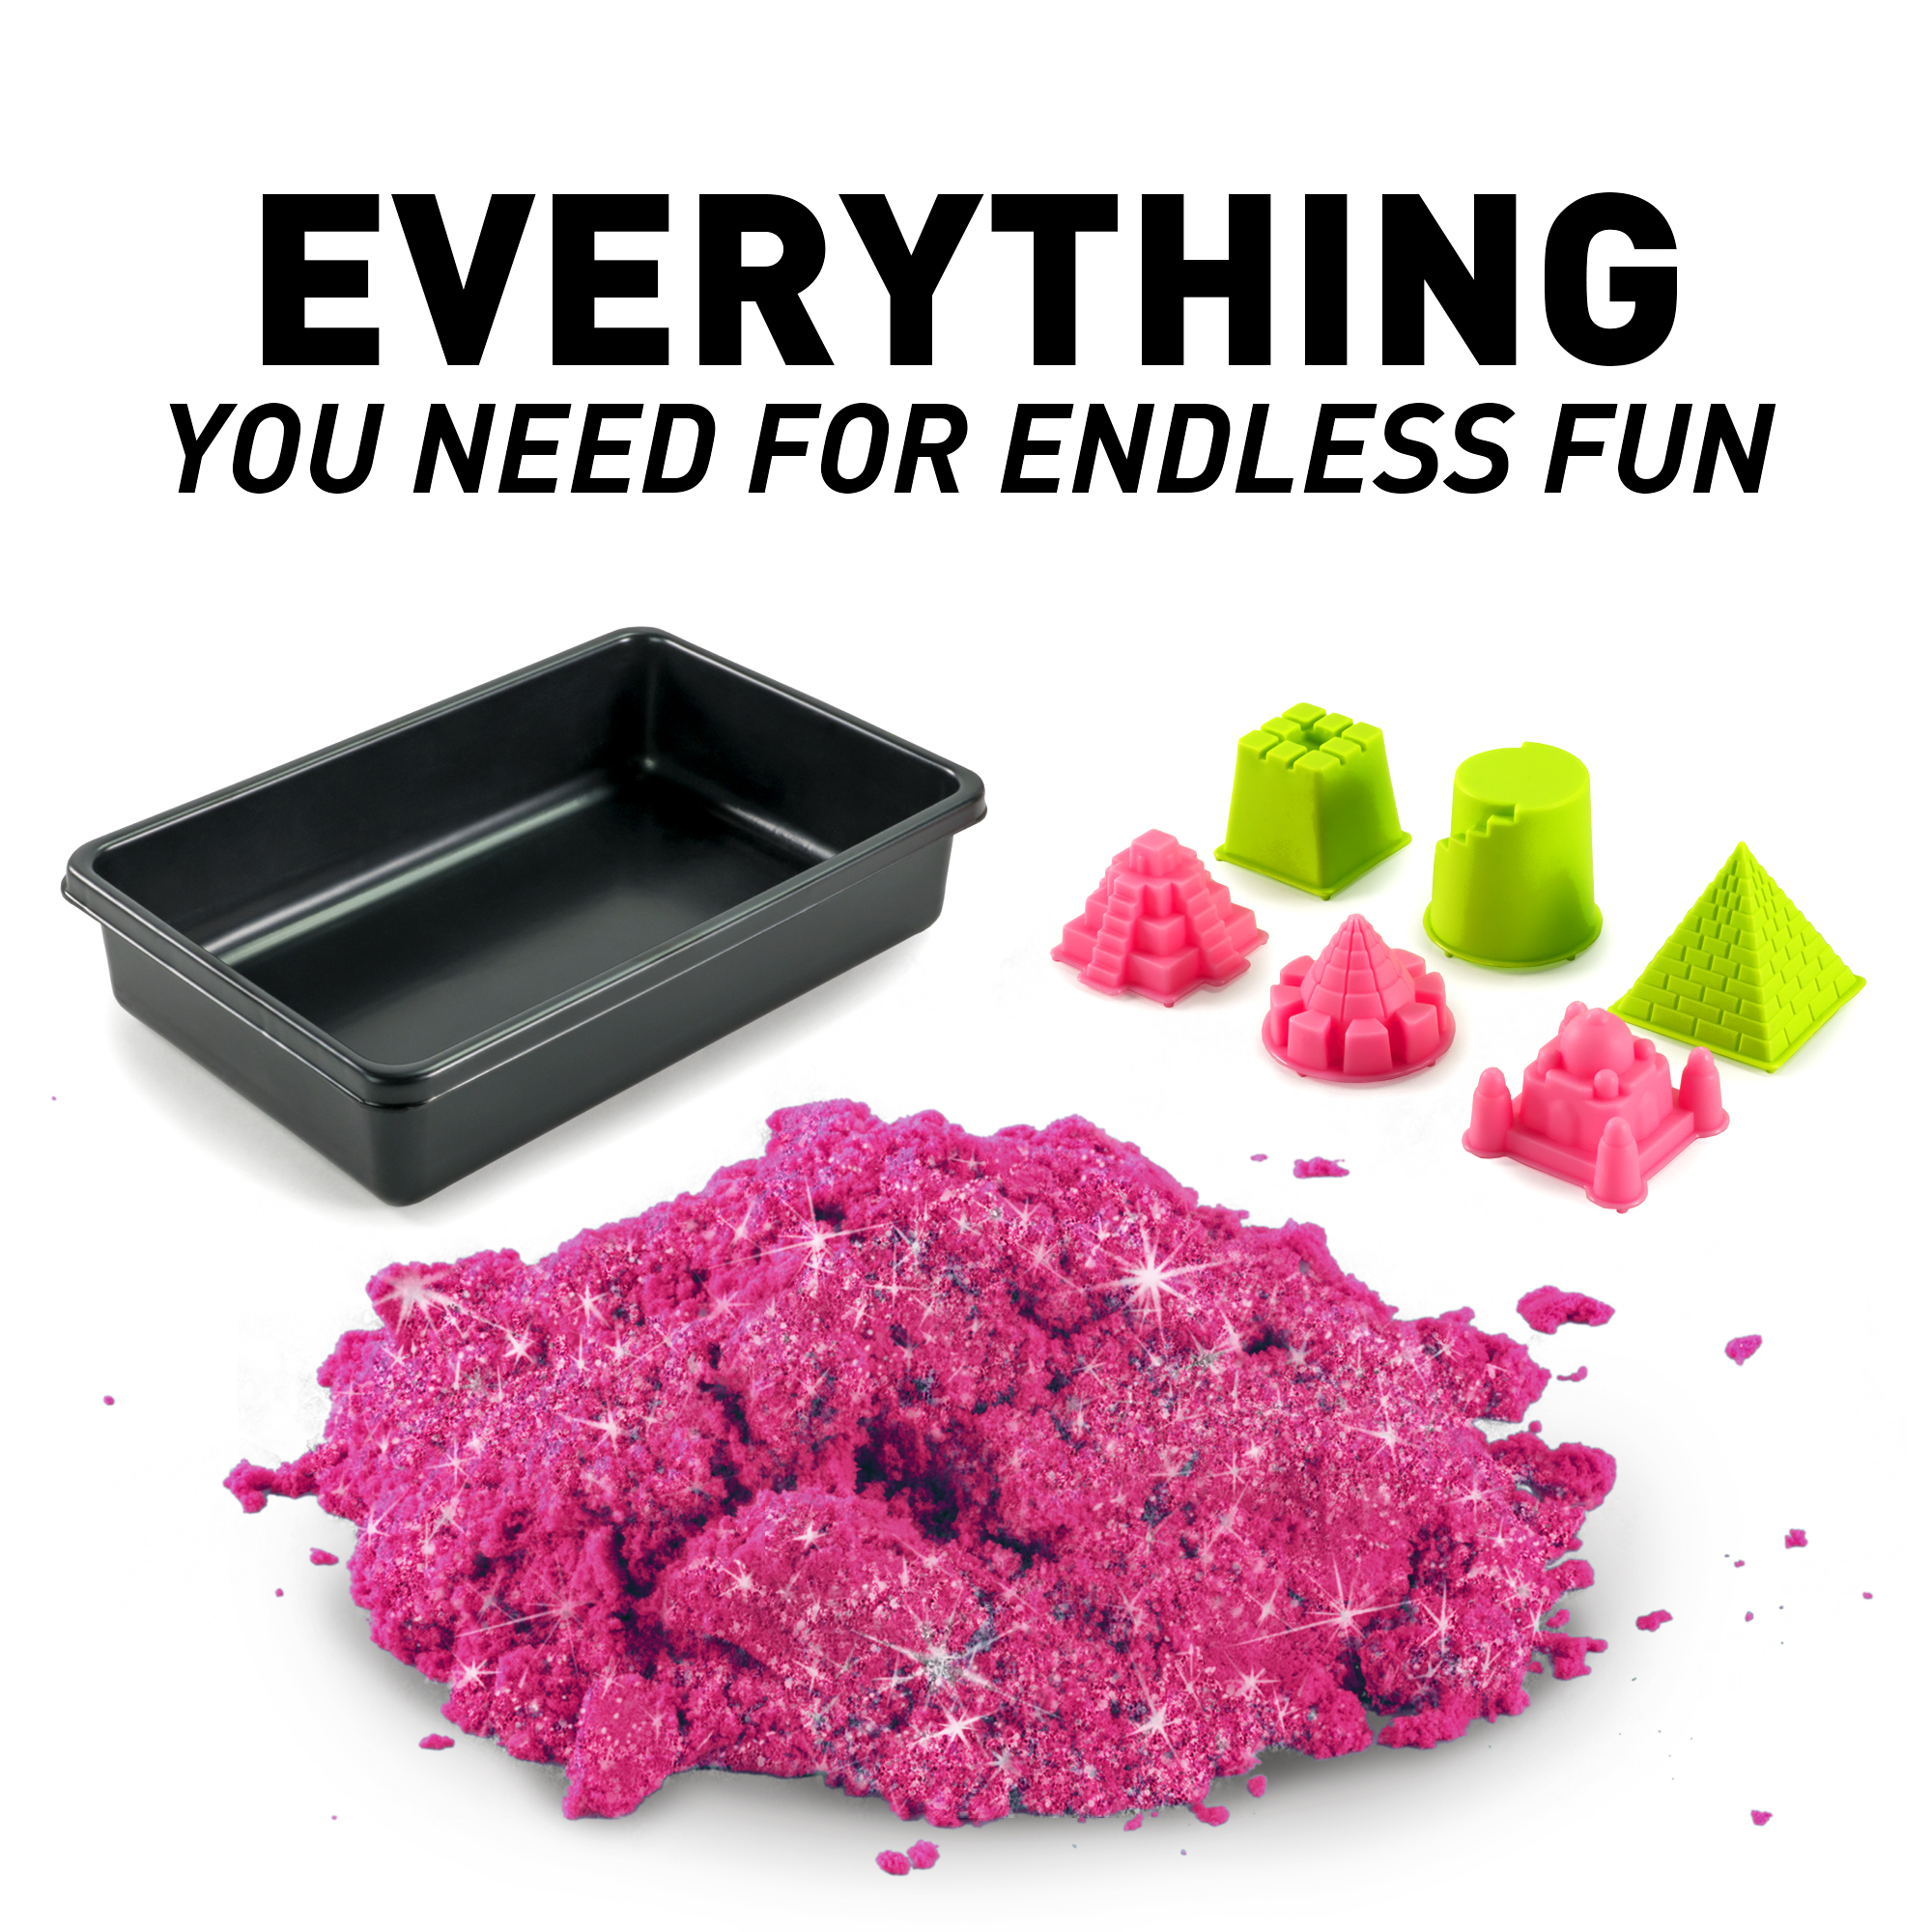 National Geographic Play Sand - 2 lbs of Sand with Castle Molds (Sparkling Pink) - A Fun Sensory Sand Activity - image 3 of 7